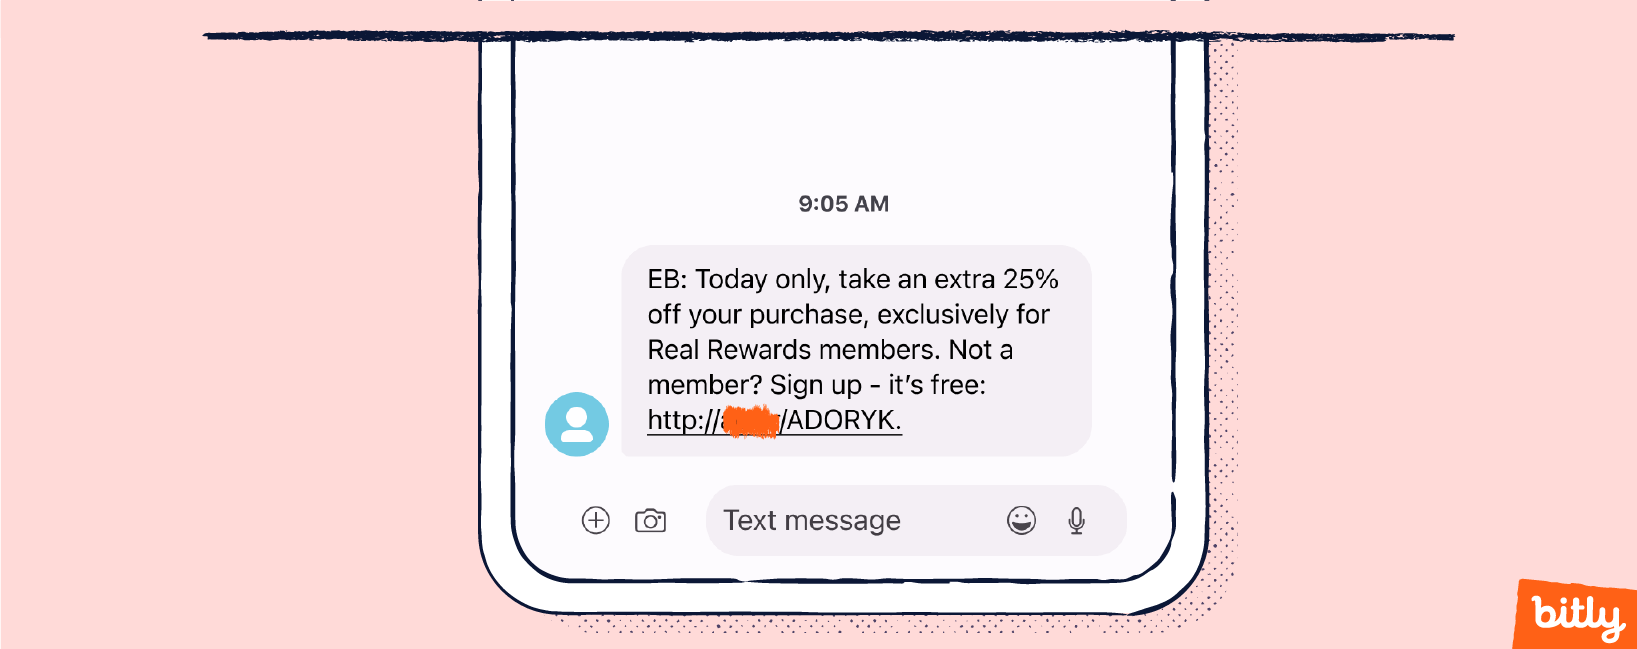 An SMS on a smartphone asking the receiver to sign up for a sale.